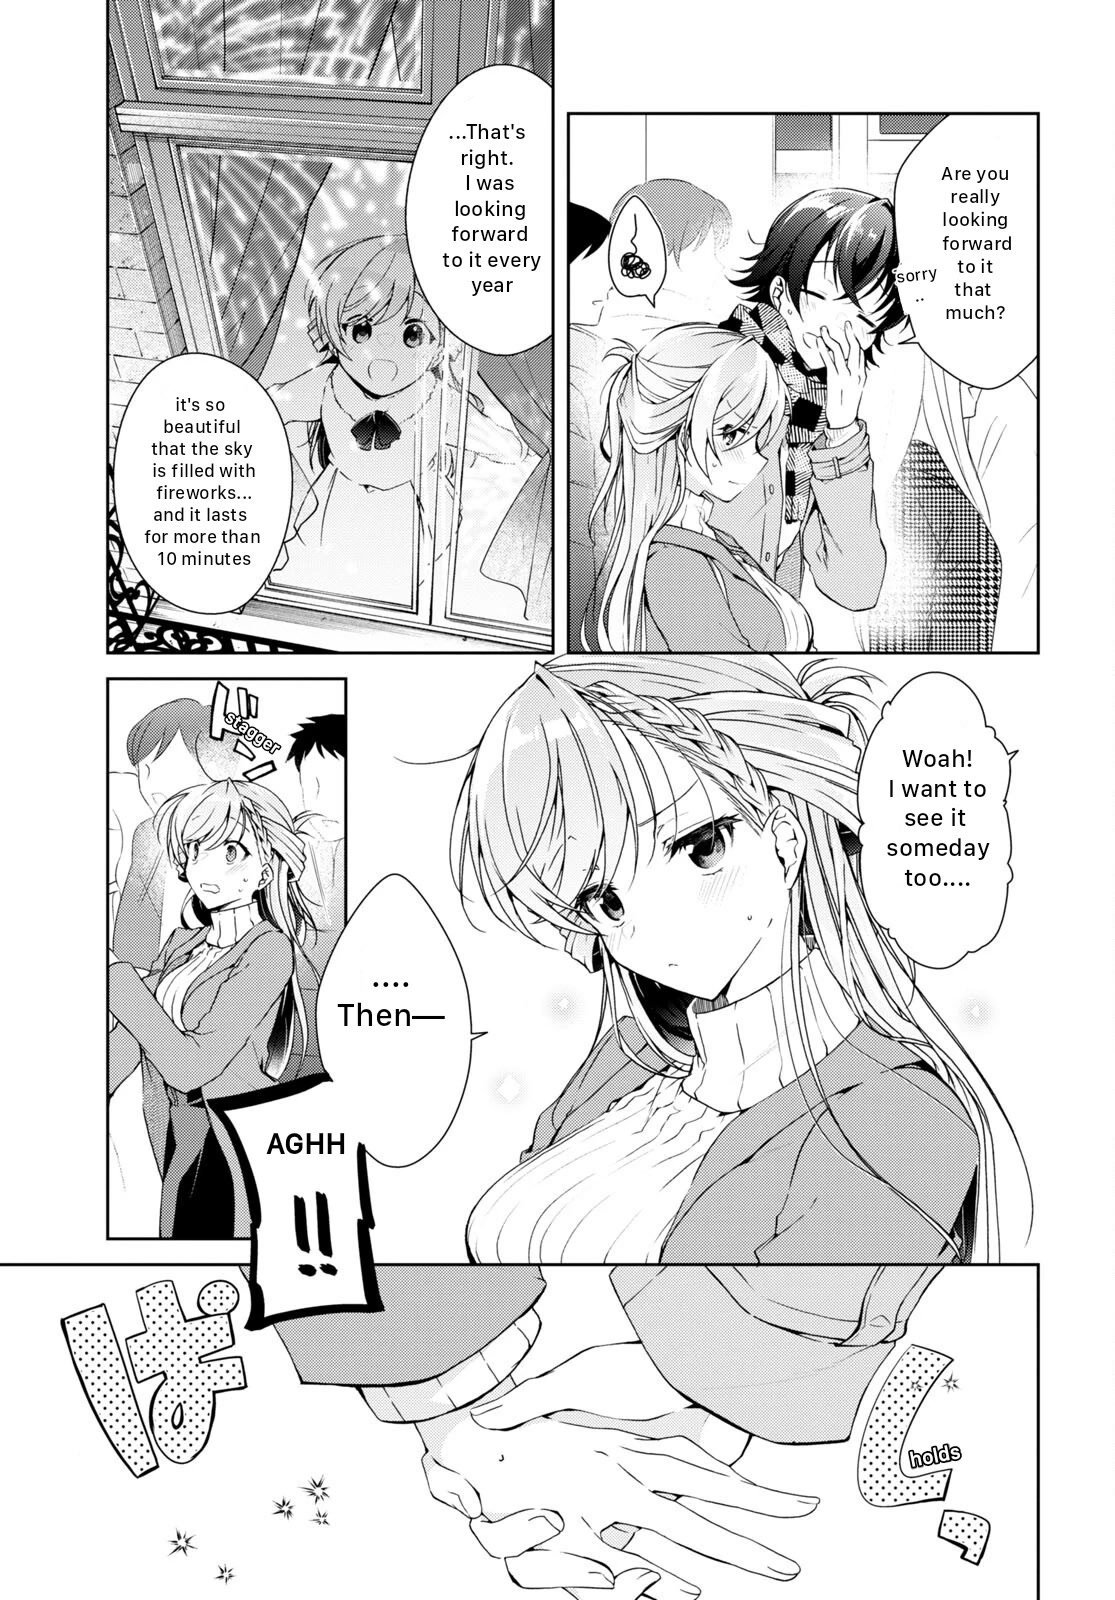 Isshiki-san Wants to Know About Love. - chapter 23 - #5